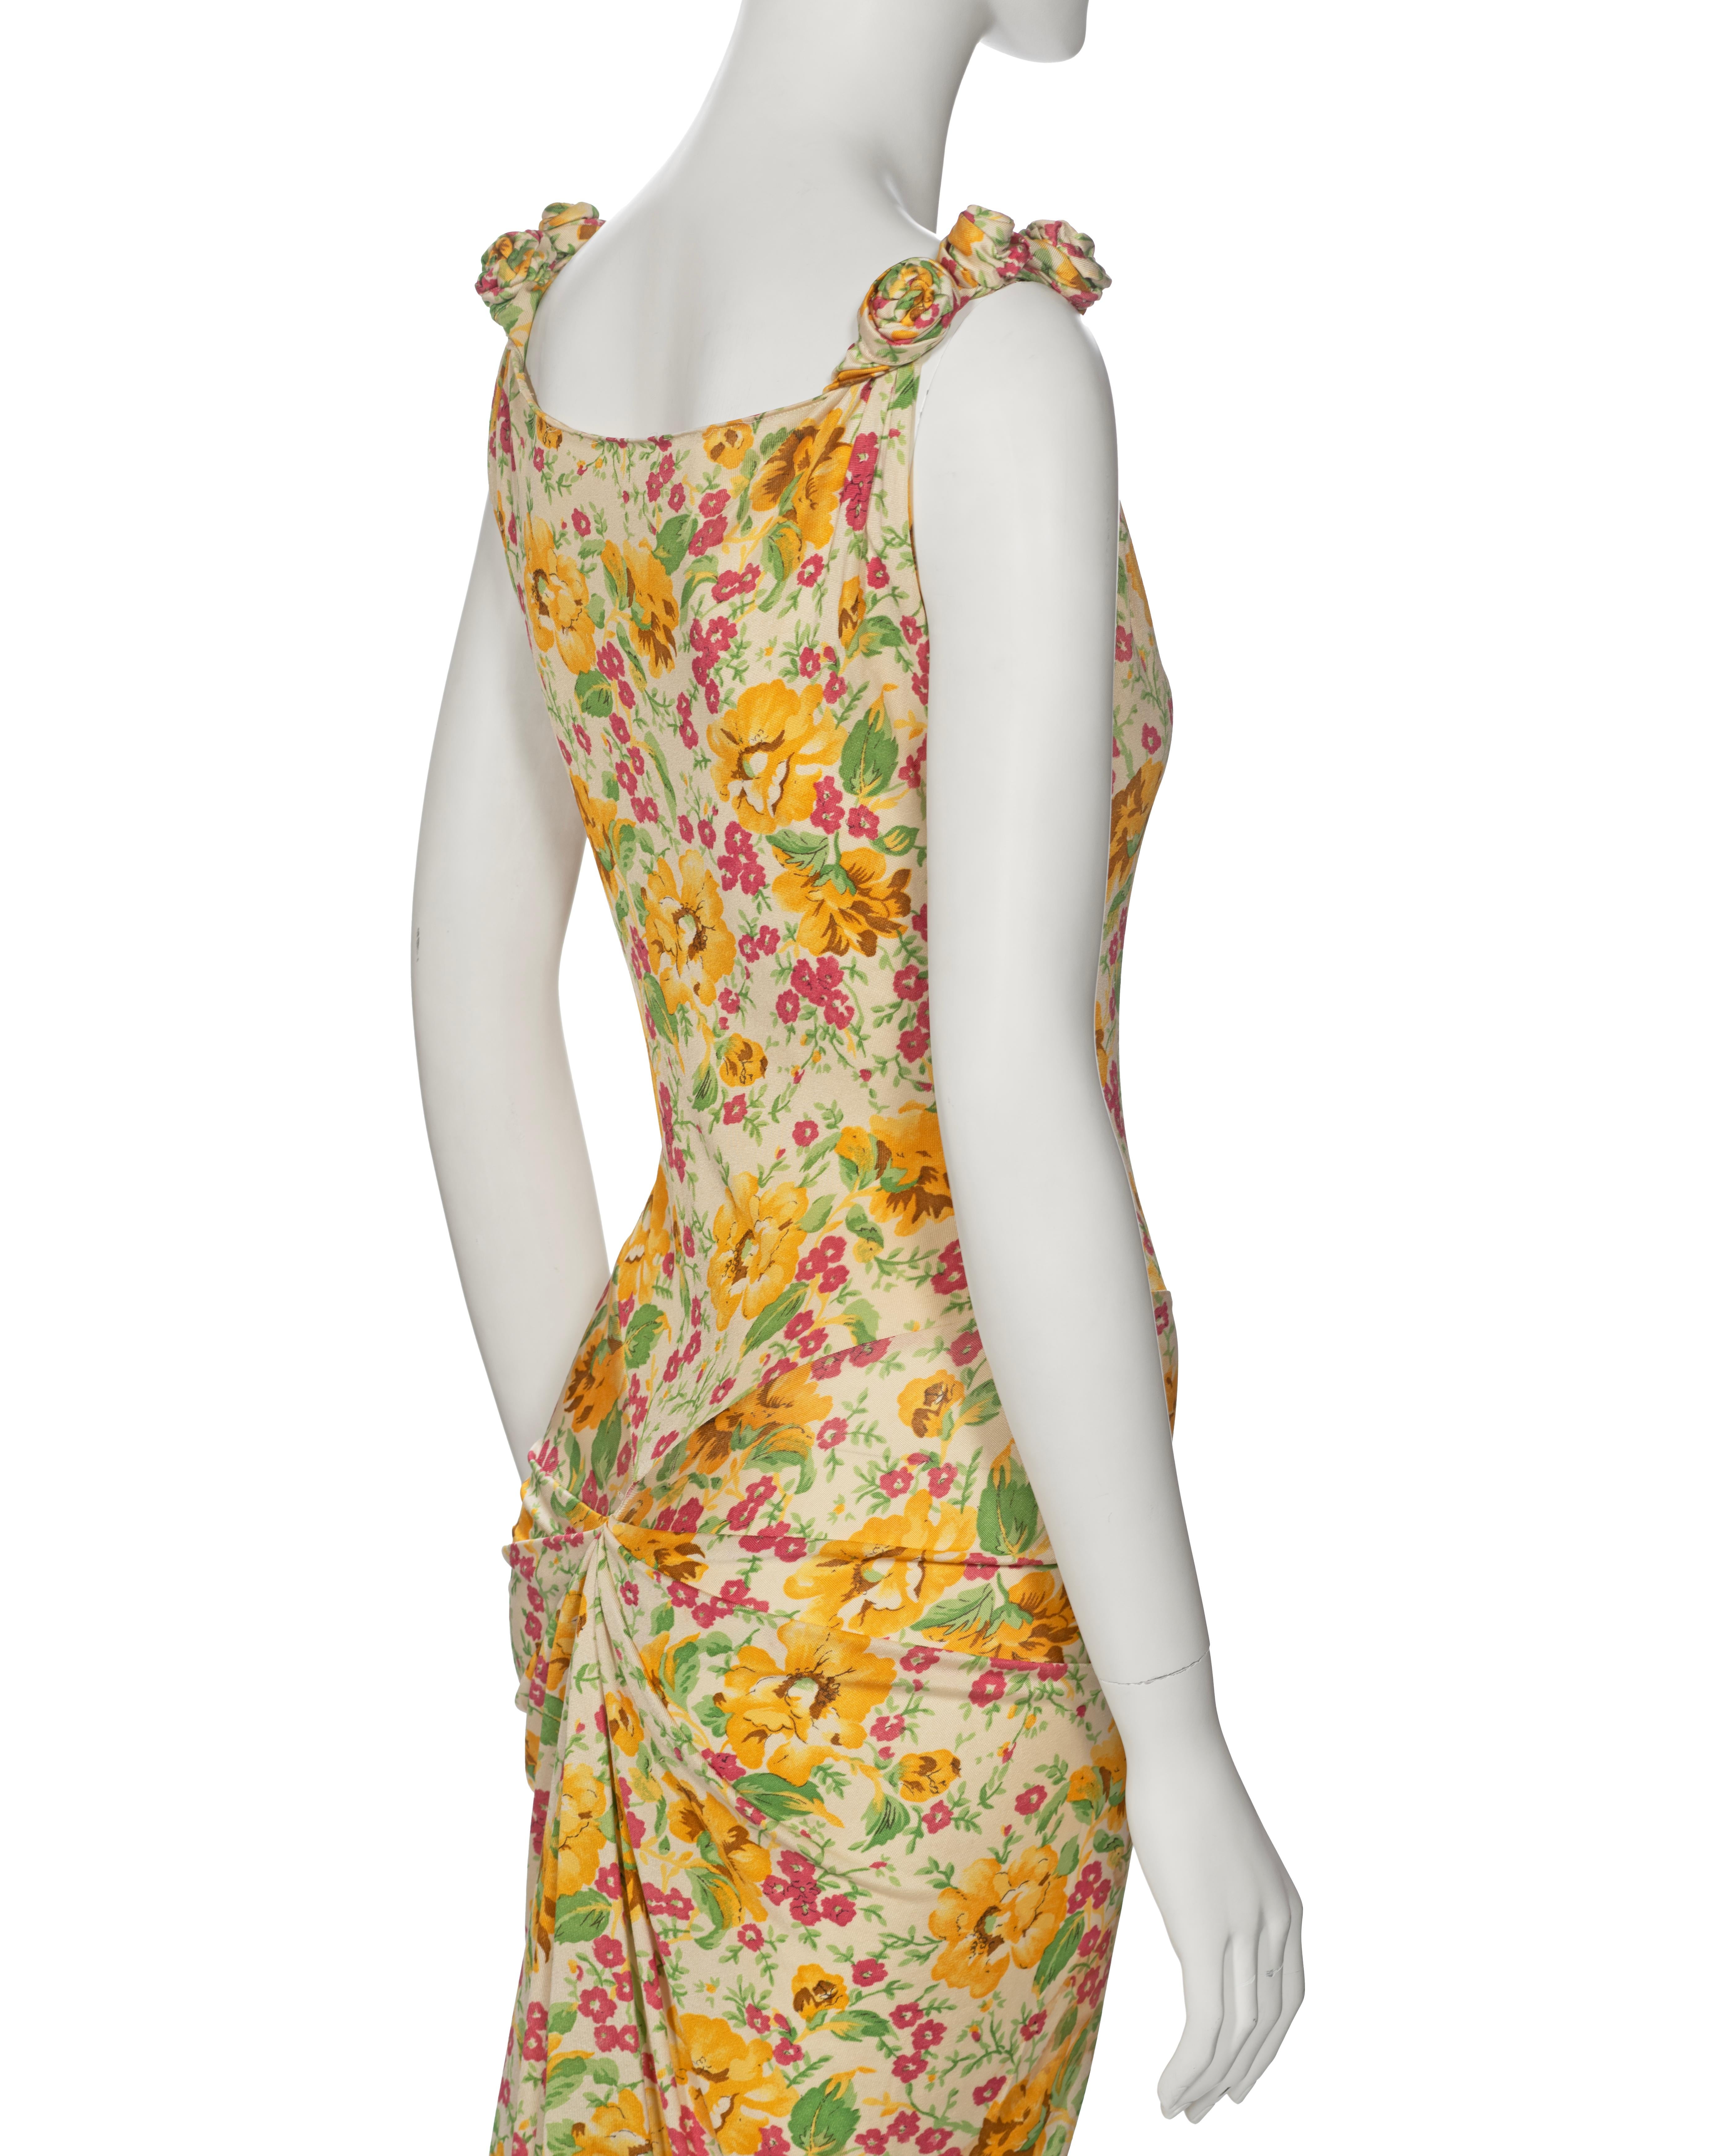 Christian Dior by John Galliano Floral Silk Jersey Cocktail Dress, ss 2000 5